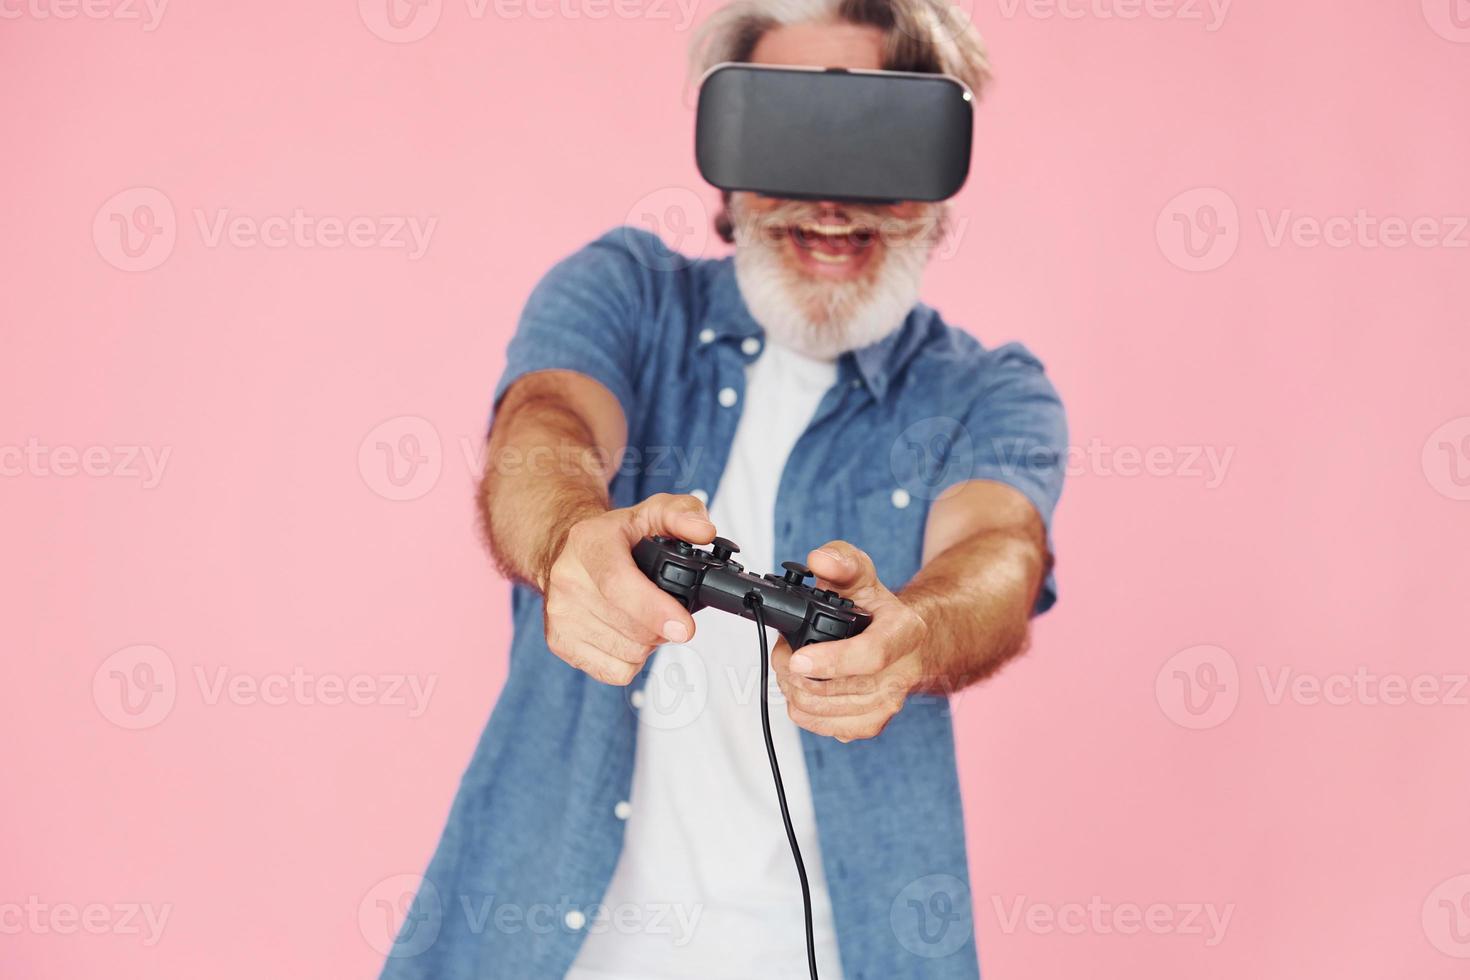 Playing game with virtual reality glasses and joystick. Stylish modern senior man with gray hair and beard is indoors photo